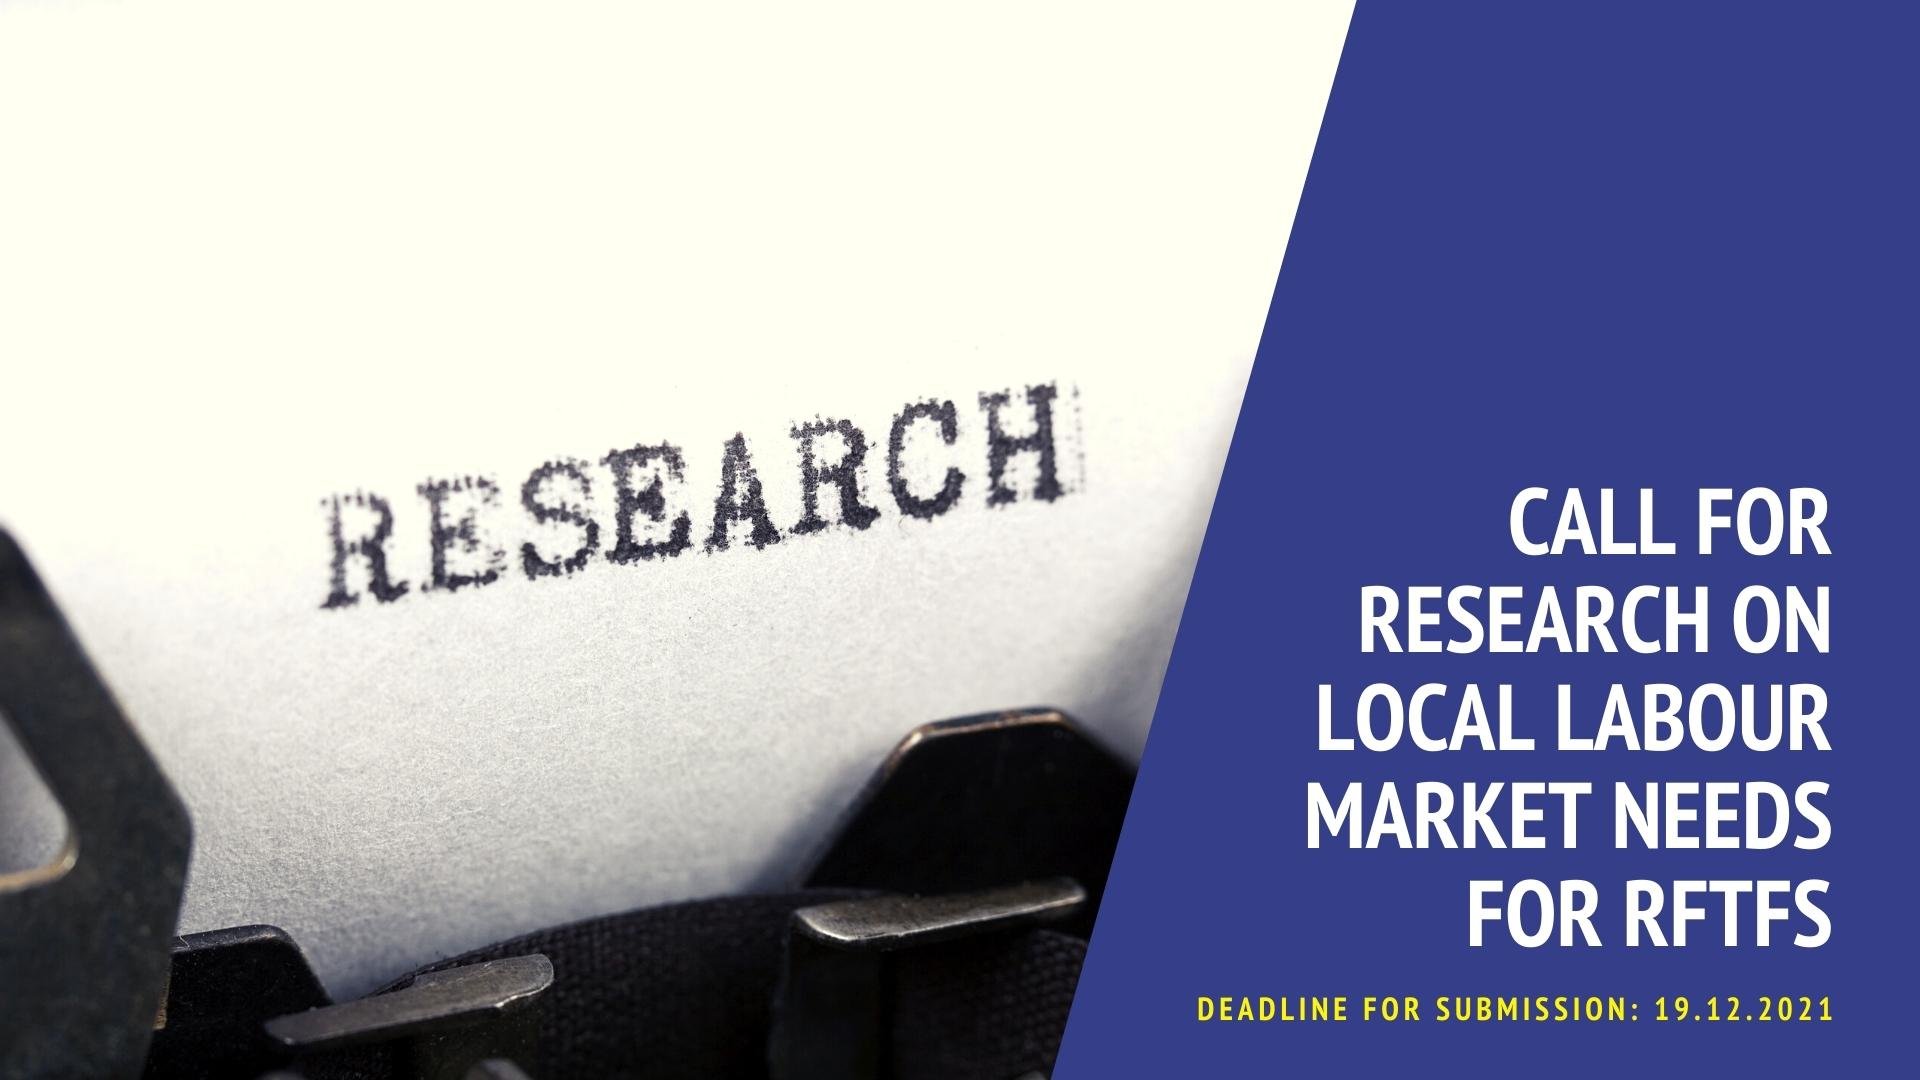 You are currently viewing TOR for the Research on local labour market needs for RFTFs and their families